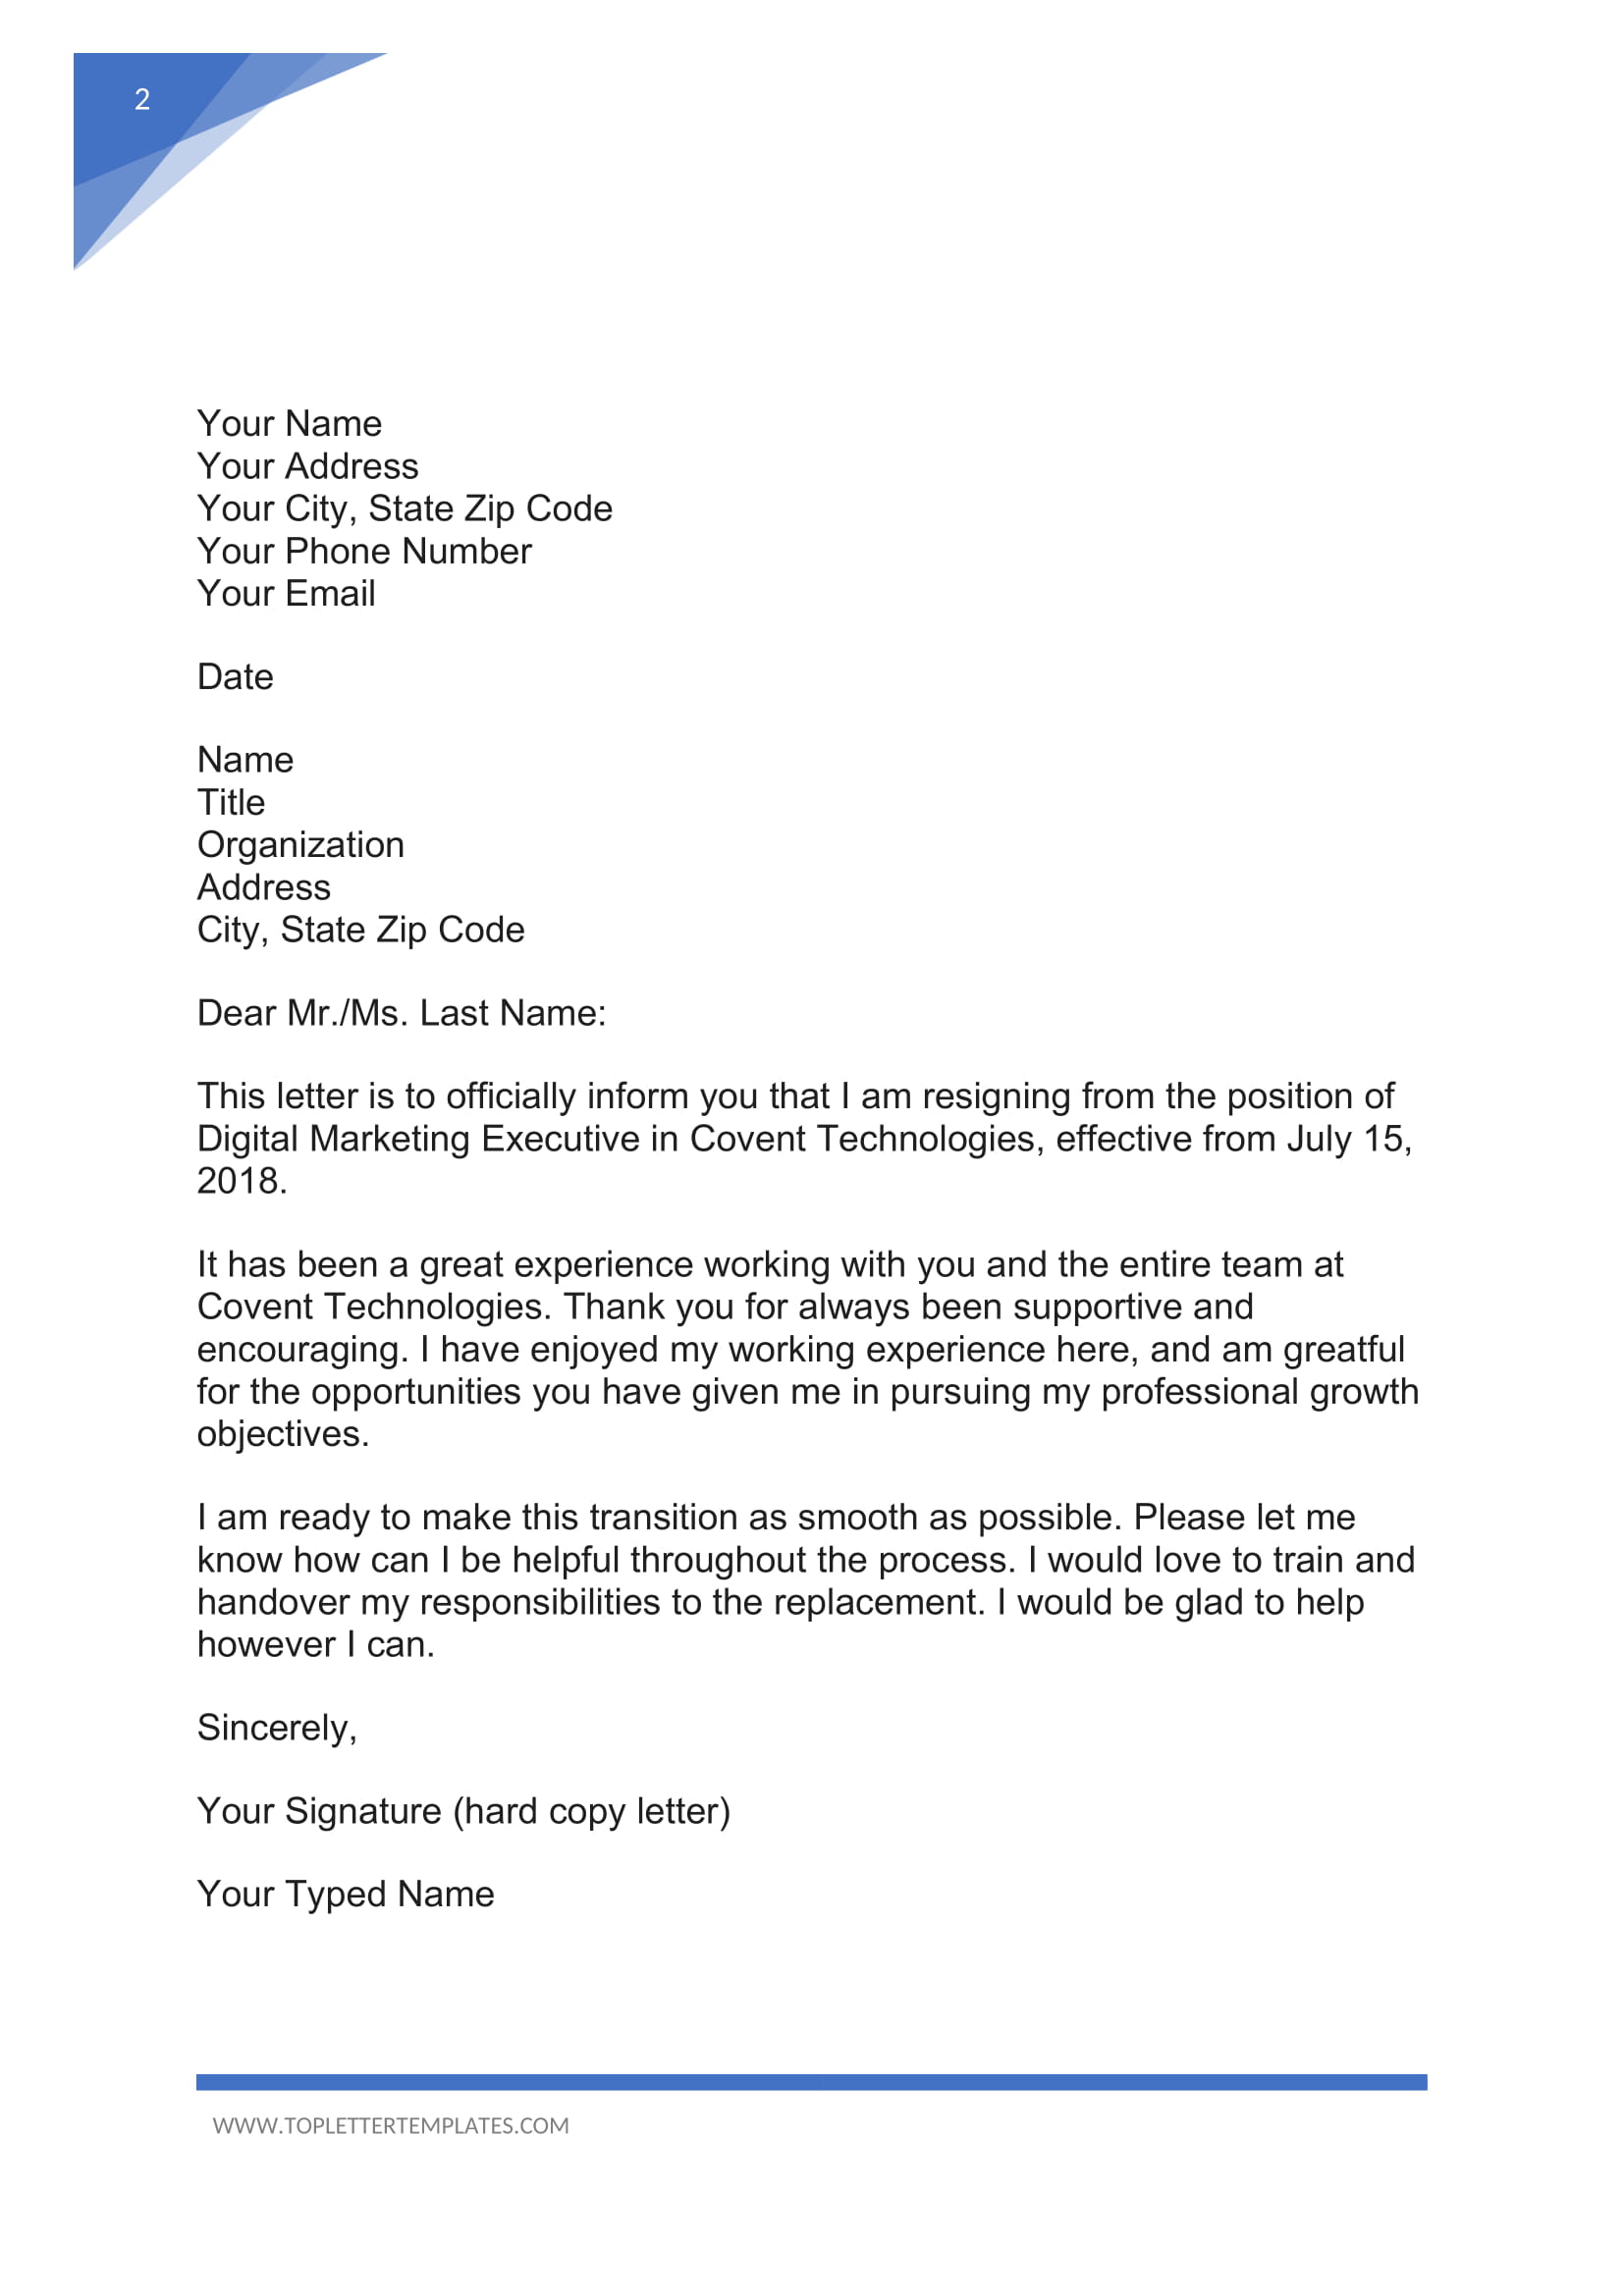 Resignation Letter Example Email Collection | Letter ...